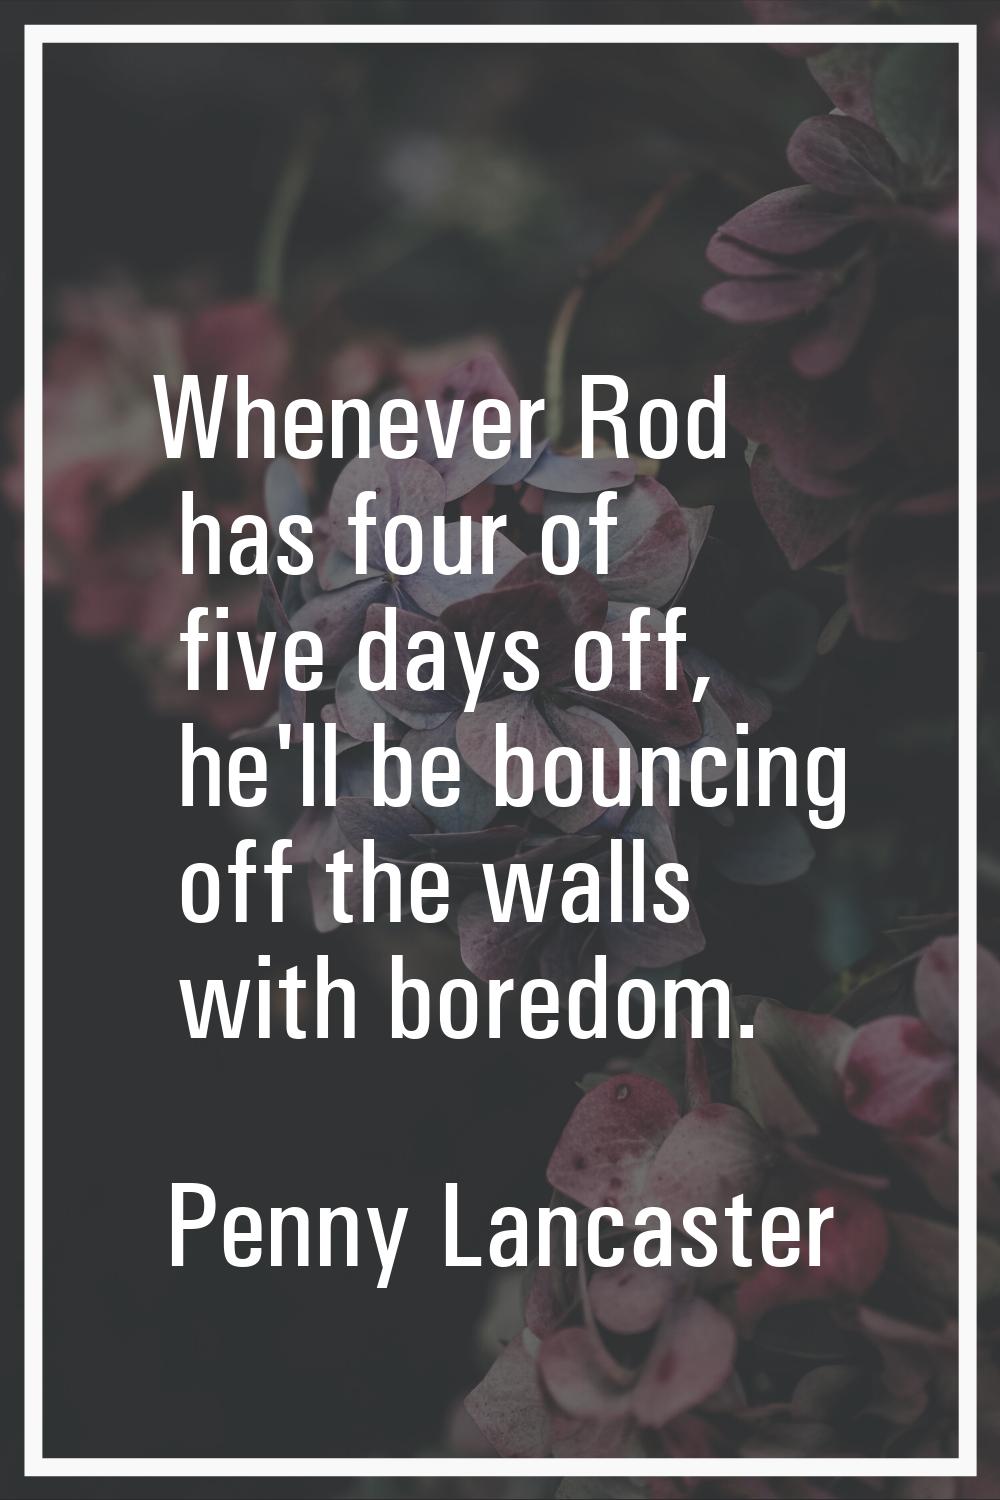 Whenever Rod has four of five days off, he'll be bouncing off the walls with boredom.